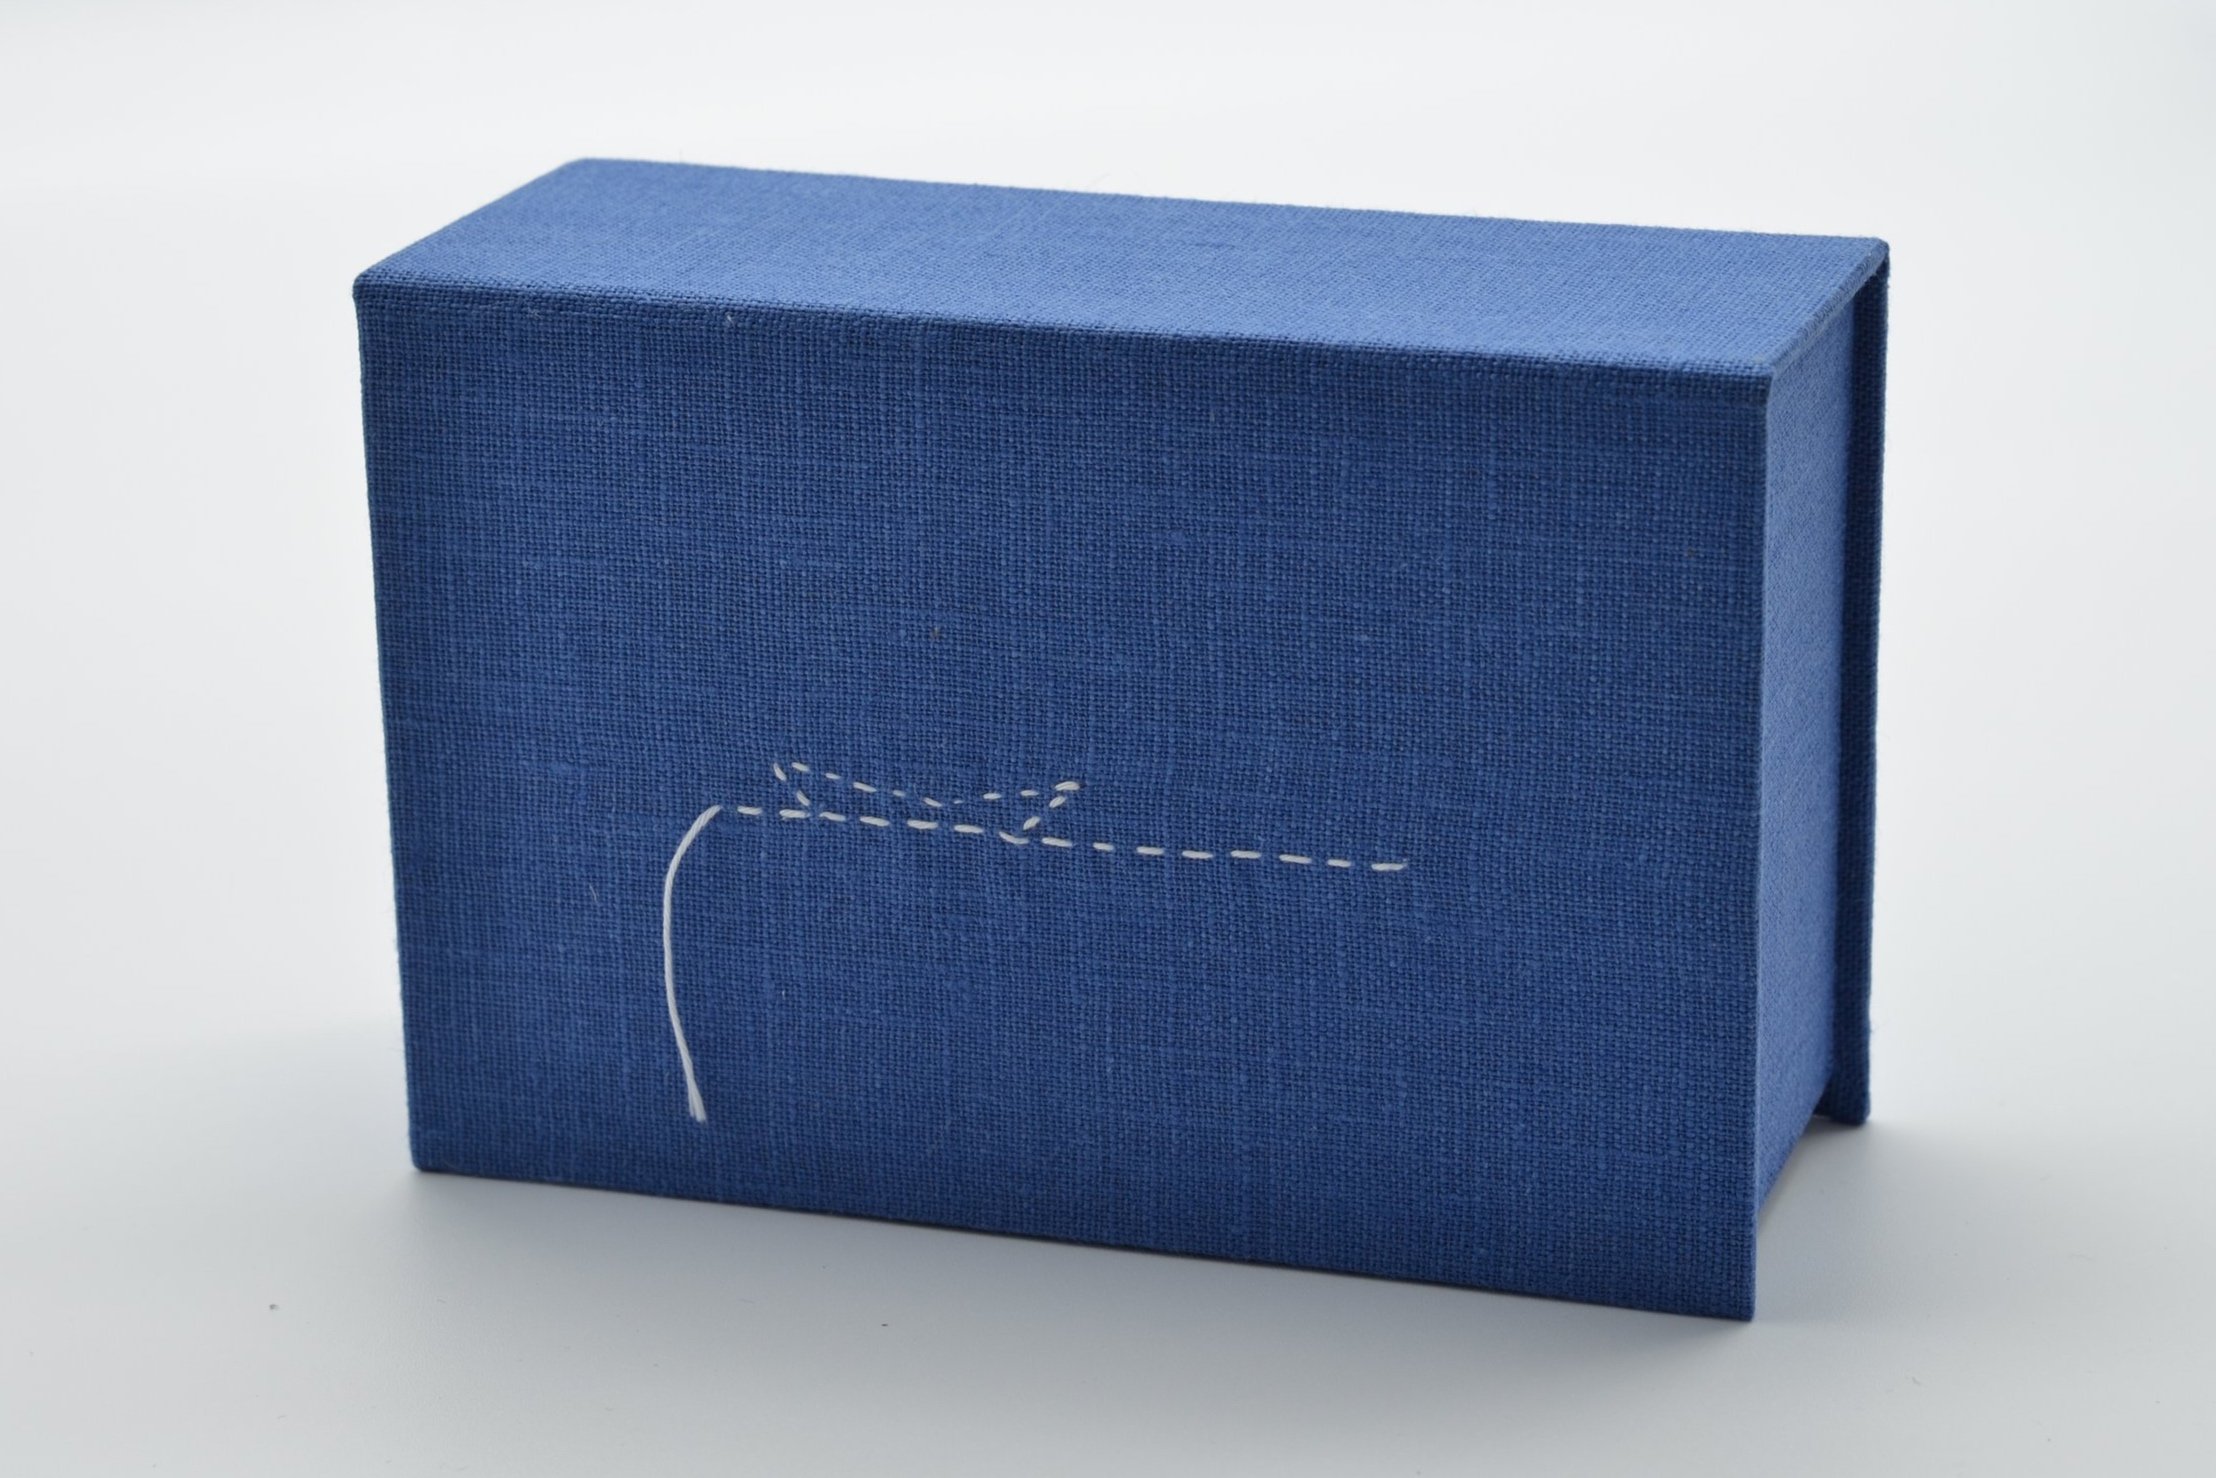 Unravel (detail - clamshell box)